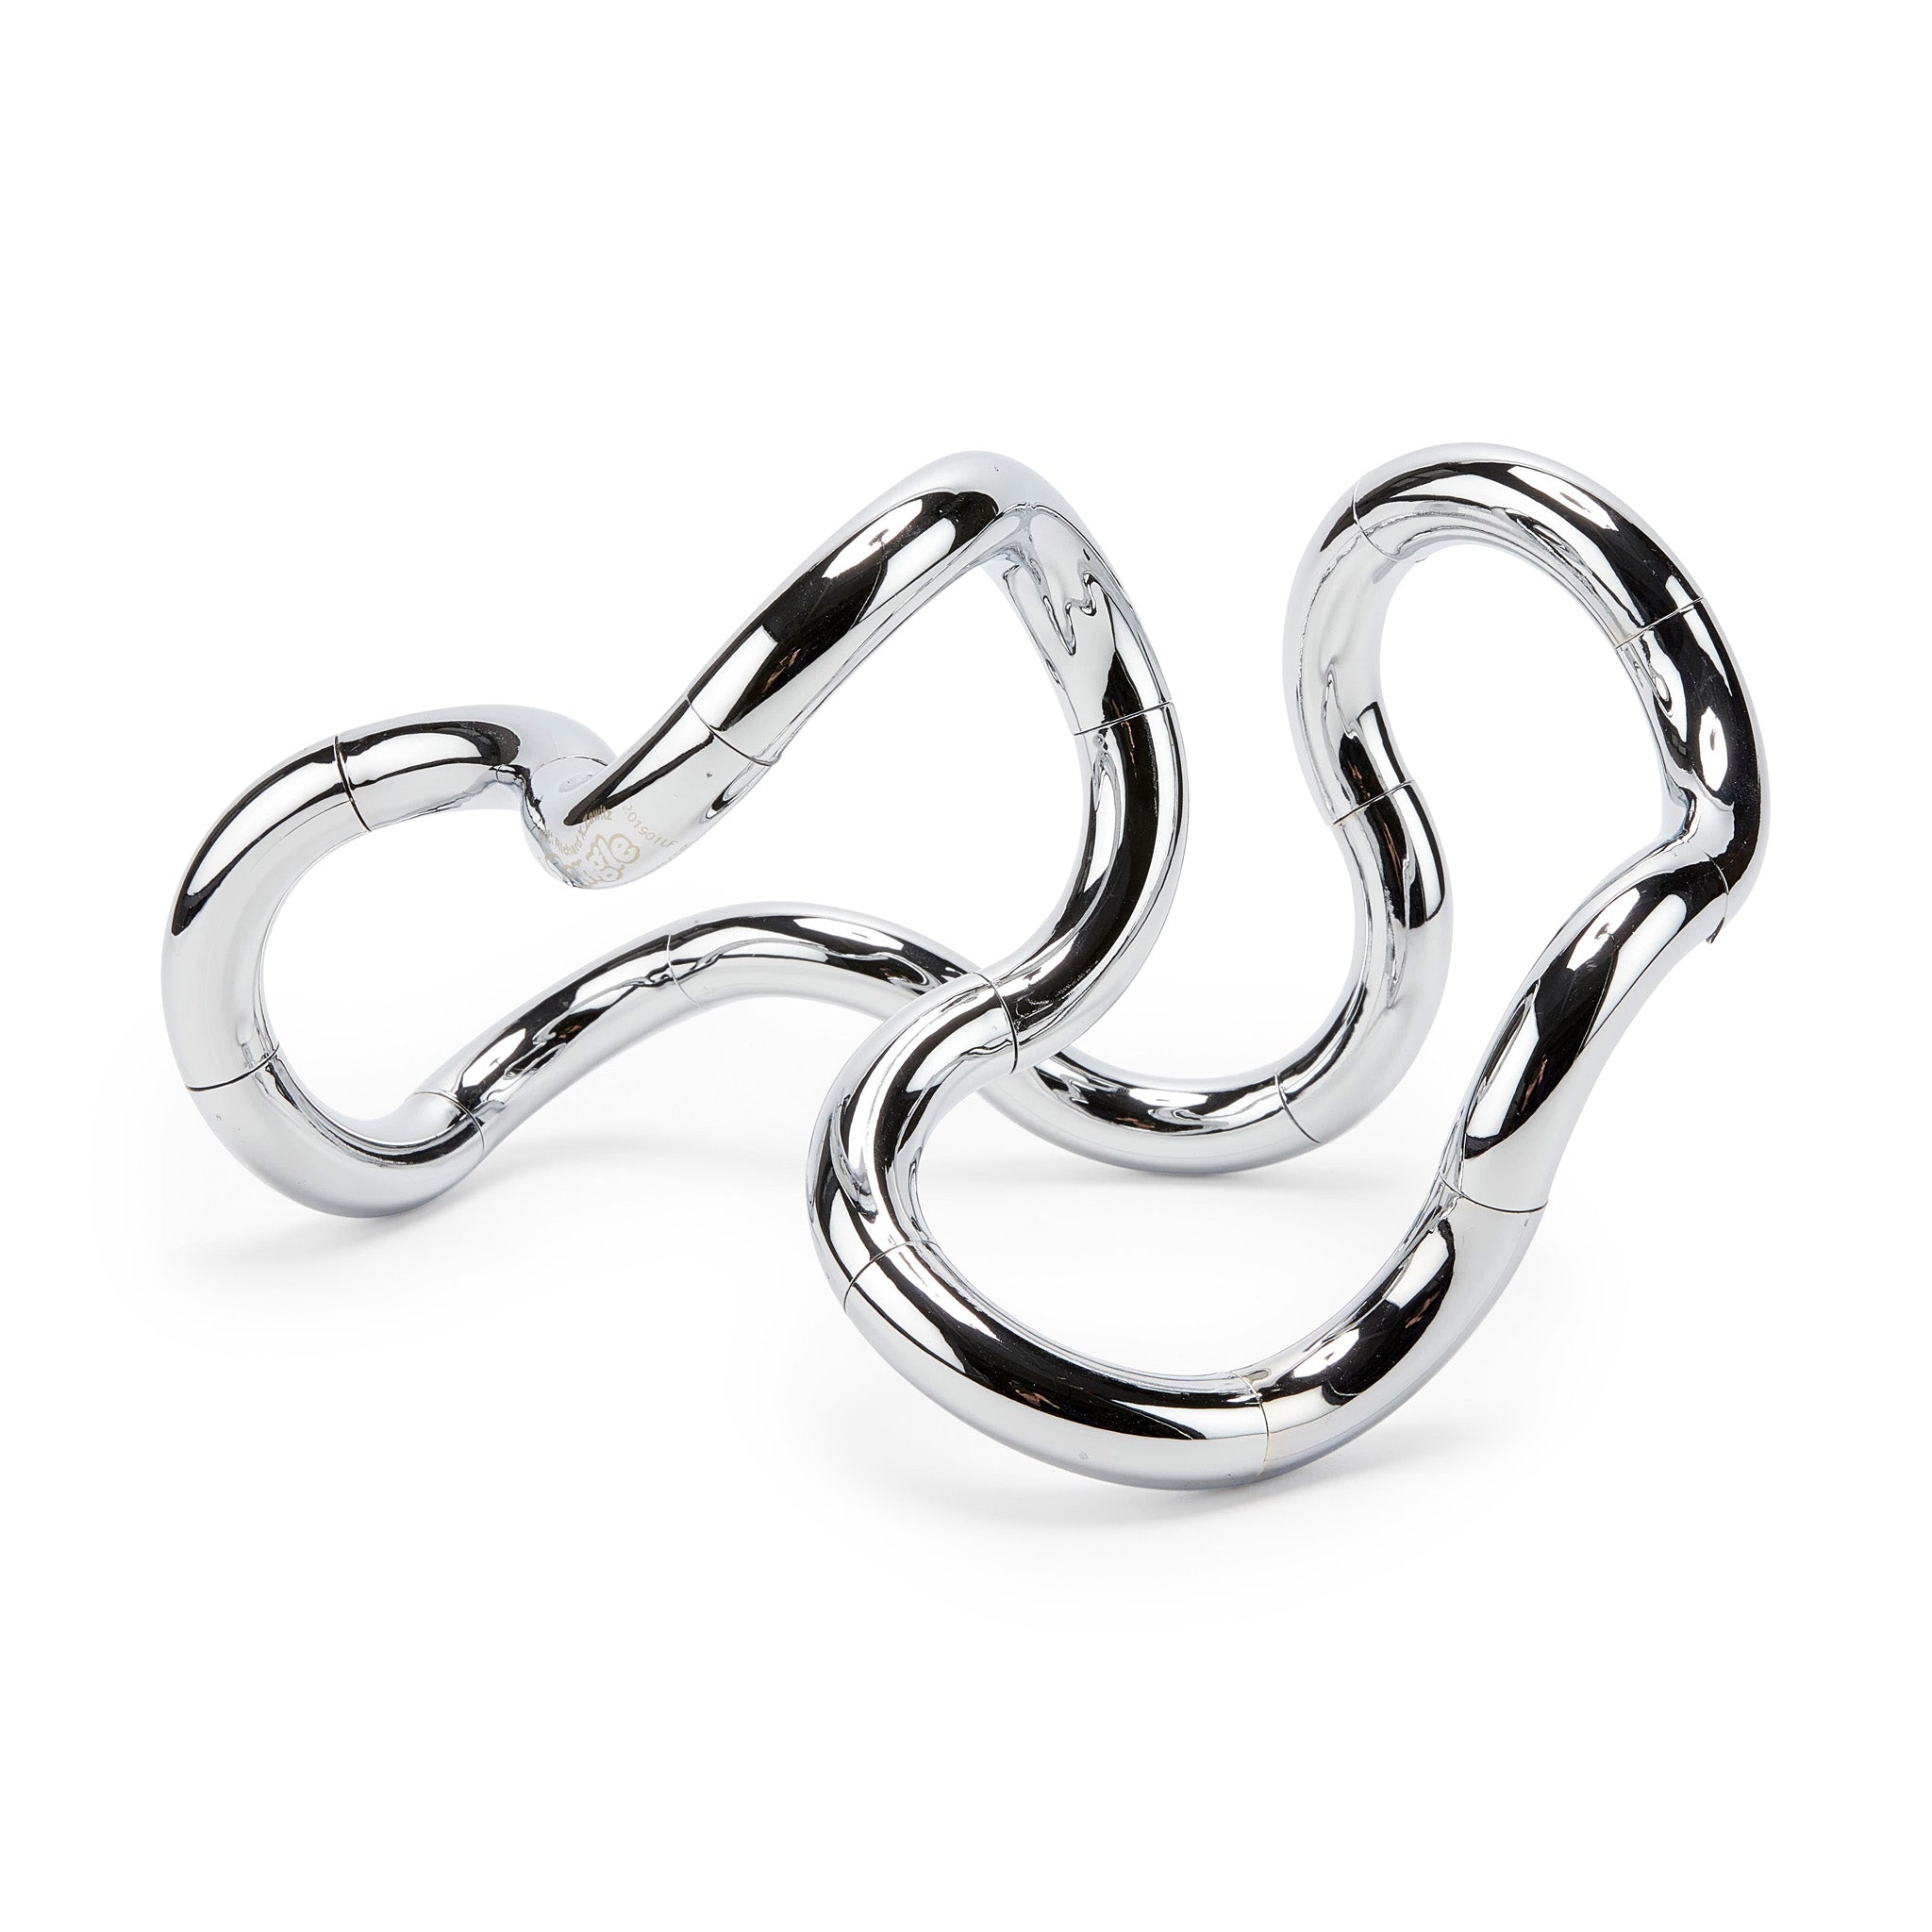 Tangle Chrome Objets - Small – MoMA Design Store